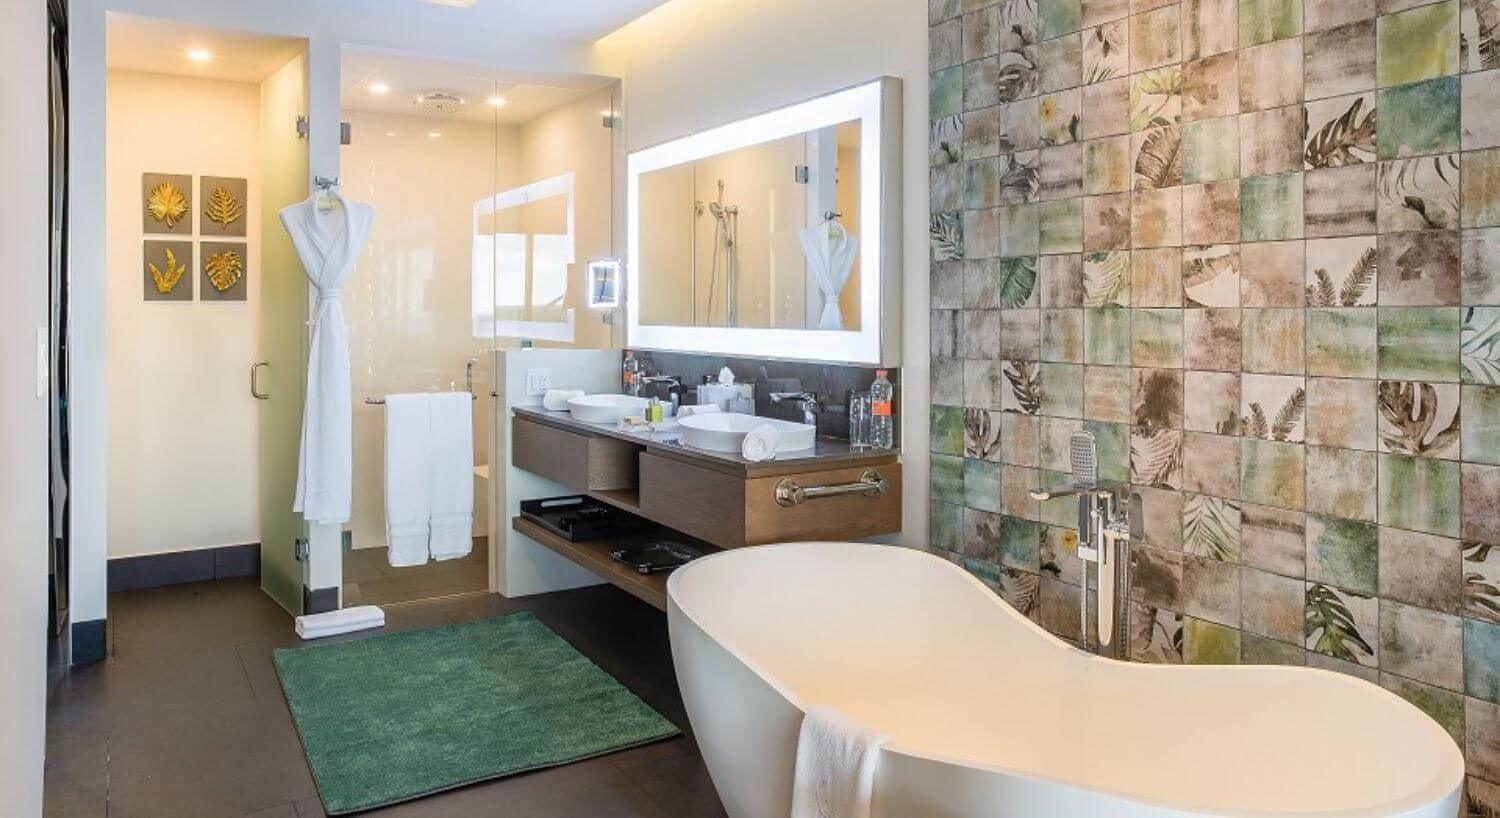 A bathroom with a deep soaking tub, a large vanity with 2 sinks and a lit mirror the width of the vanity above the sinks, along with a walk in shower.